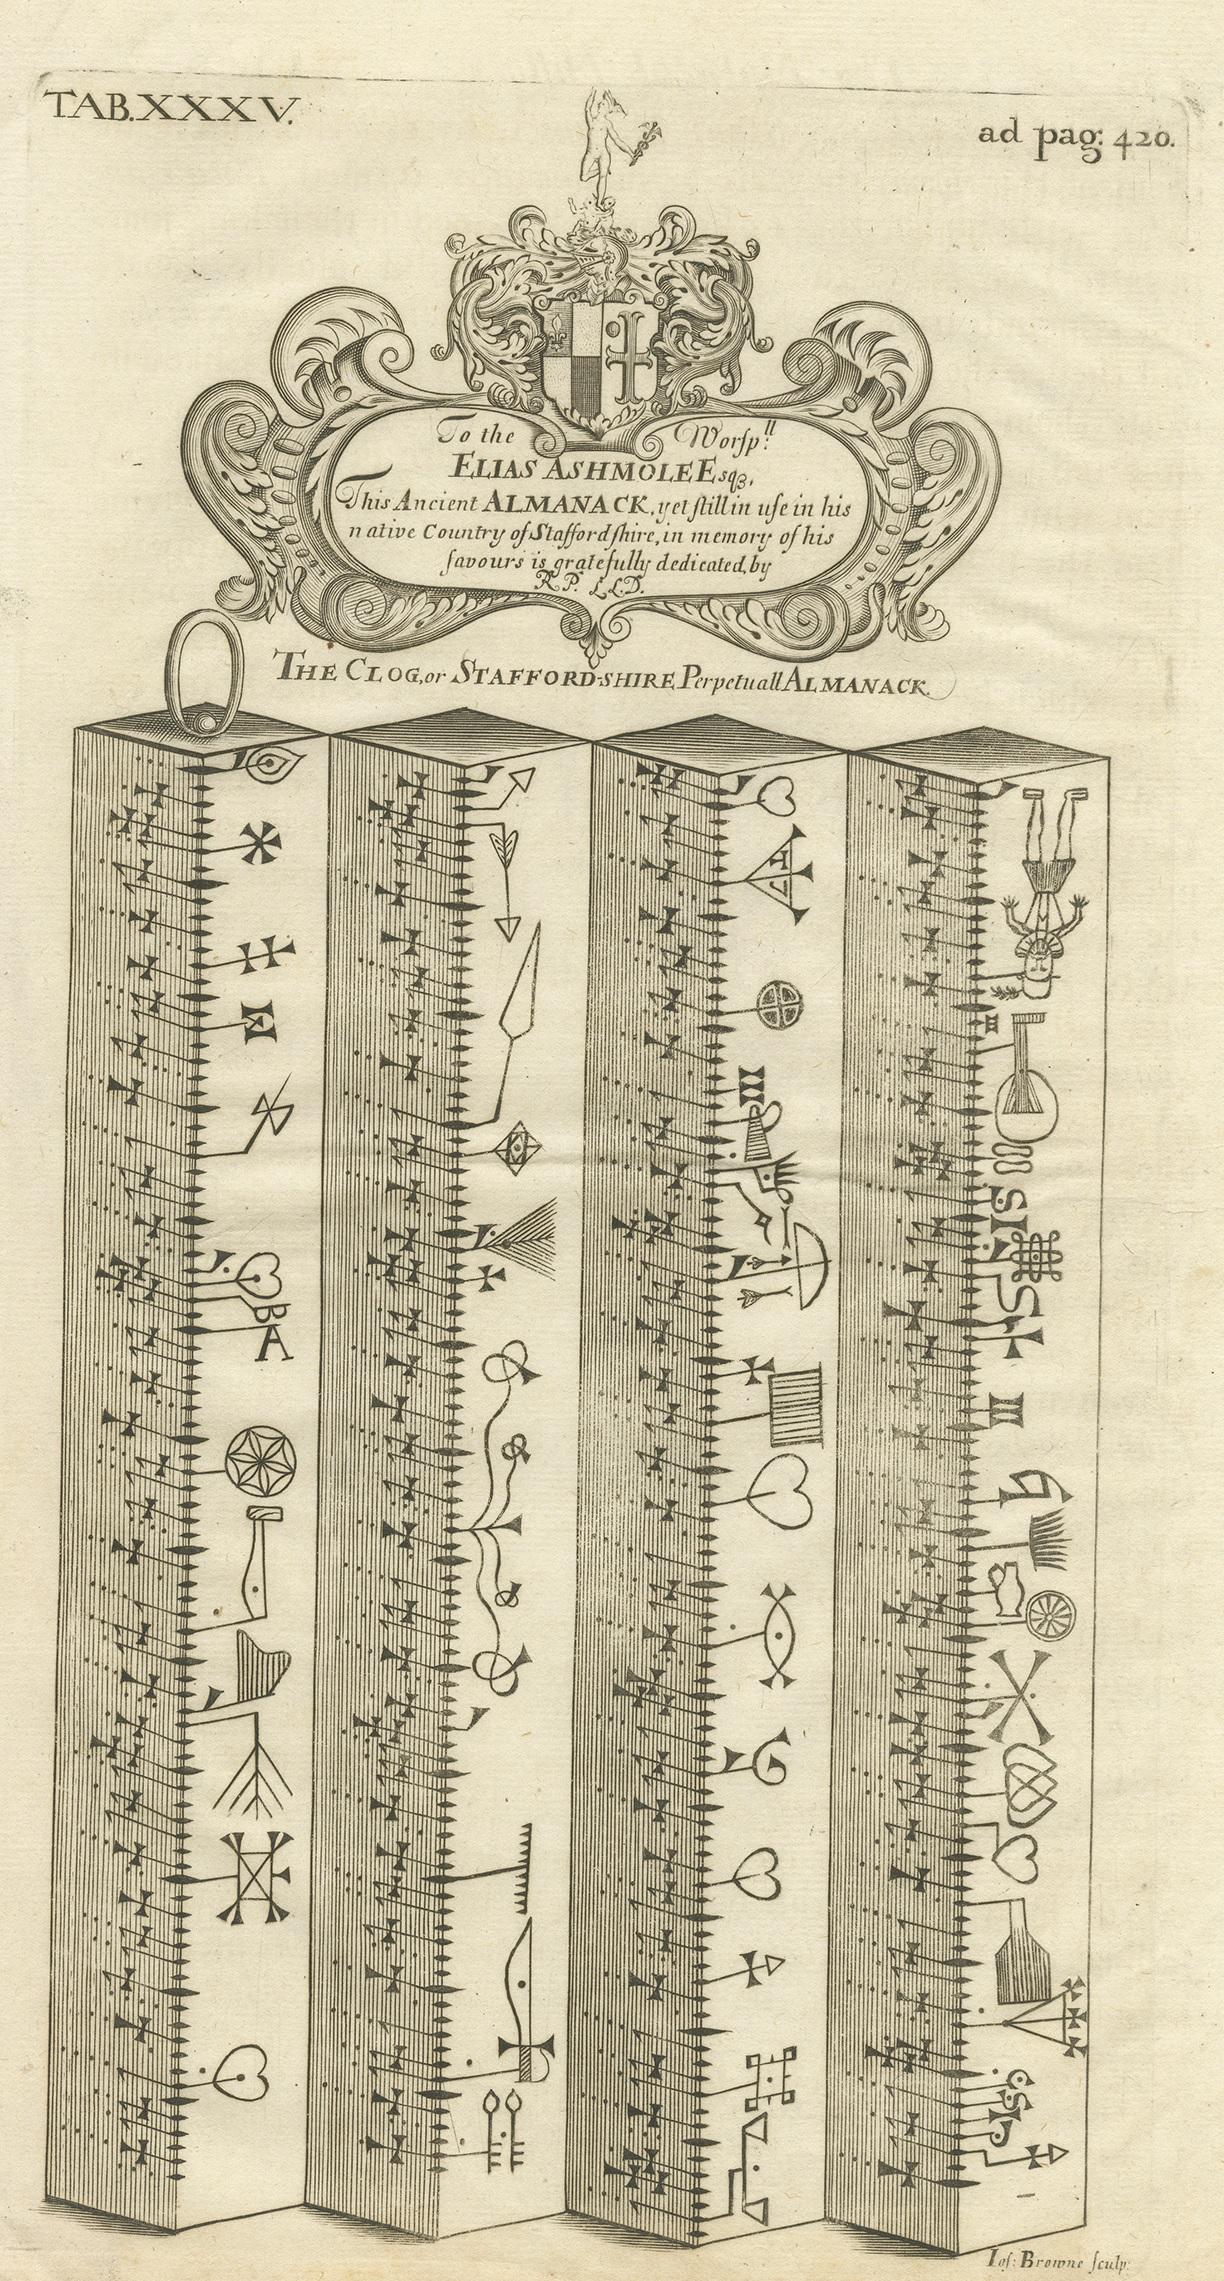 Antique print titled 'The Clog, or Stafford-Shire Perpetuall Almanack'. Engraving of a perpetual almanac (a type of calendar) devised for the English County of Staffordshire, and presented in the form of a clog almanac, which consisted of a log of